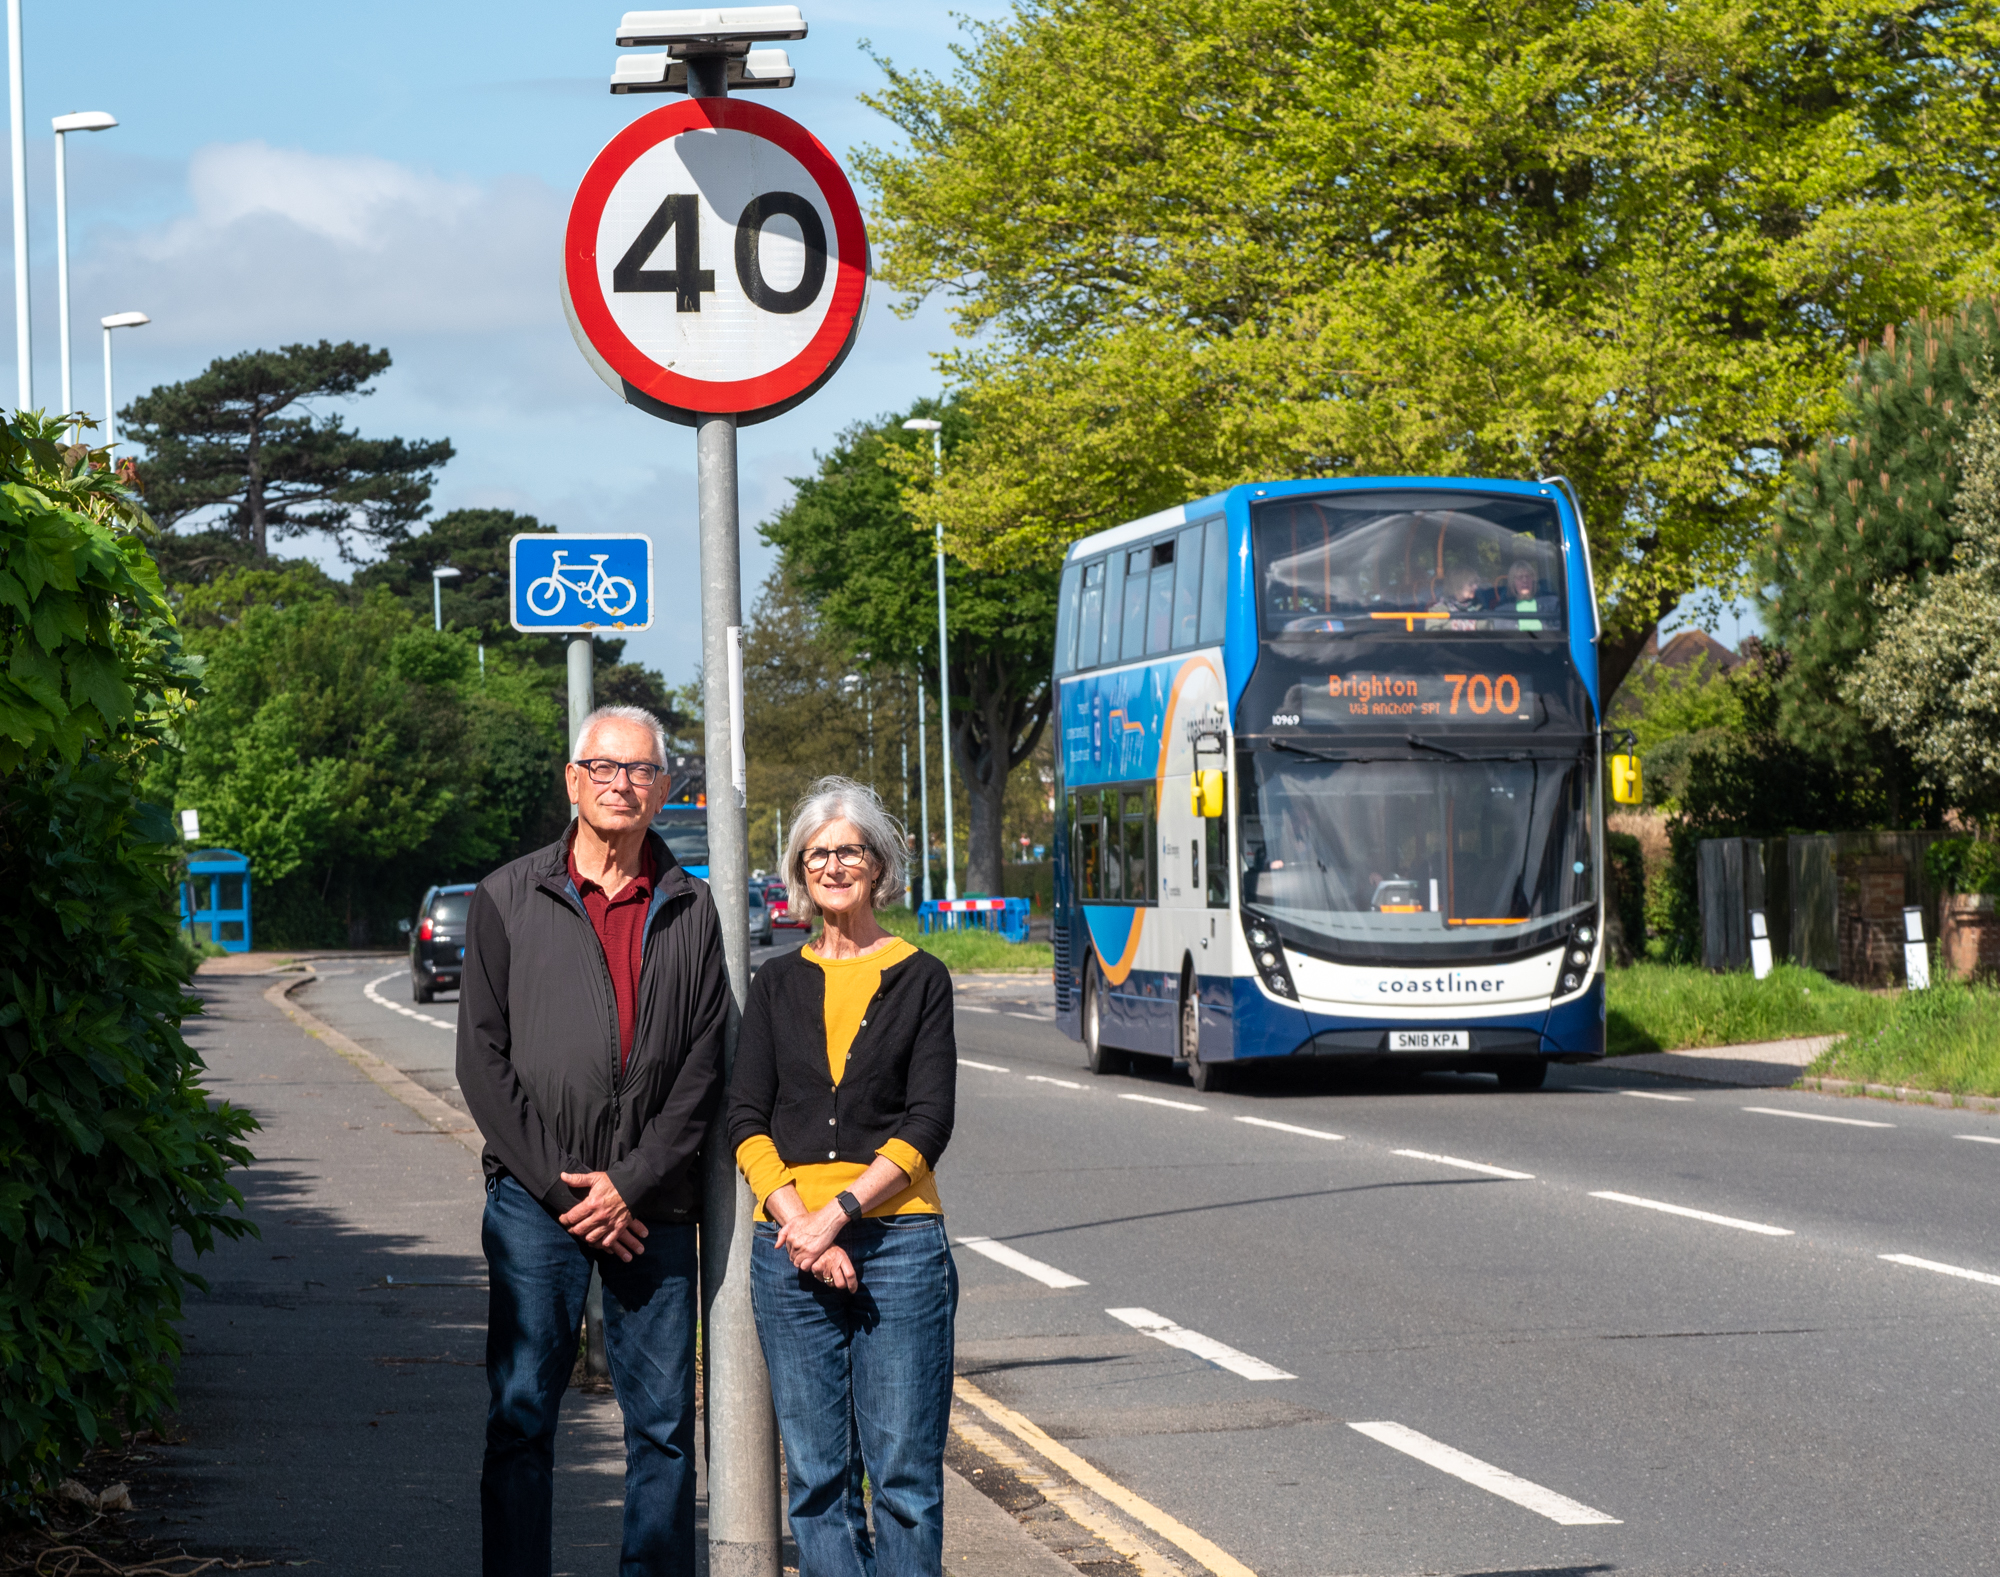 Claire Hunt and Ian Davey stand in front of a 40 mph sign on Goring Road